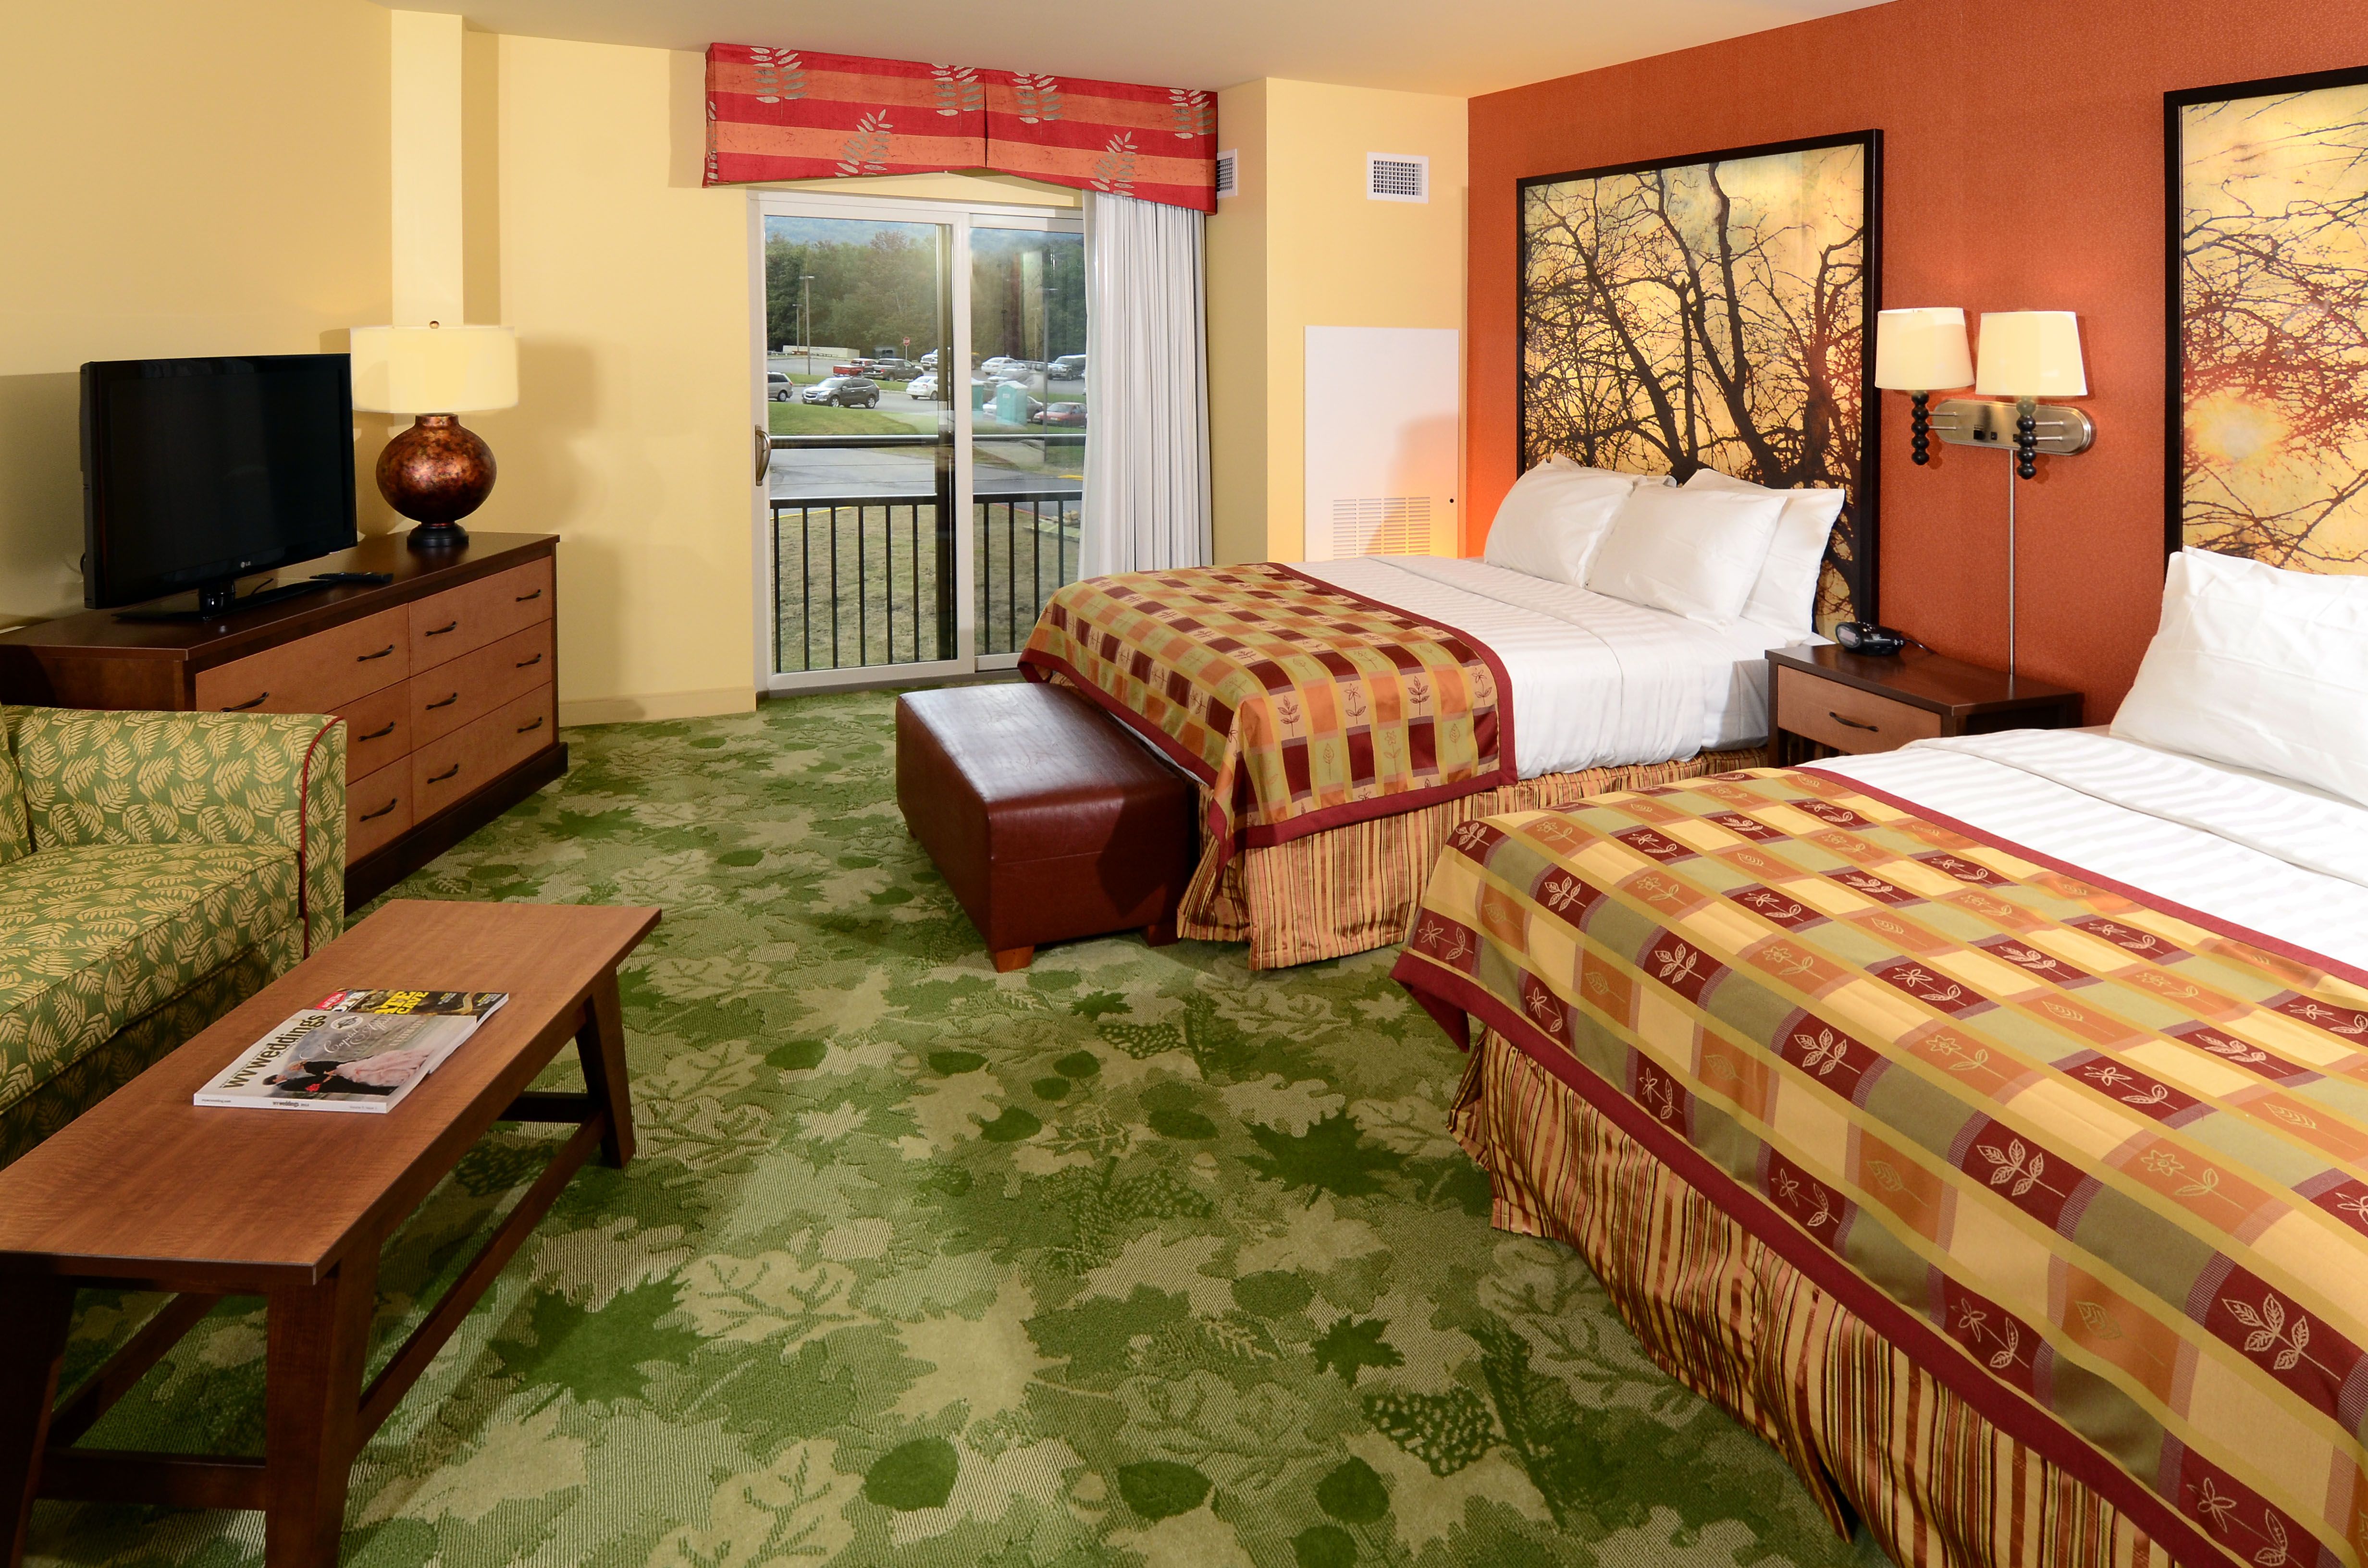 Large, comfortable bedrooms are part of the new Canaan Valley Resort State Park Lodge